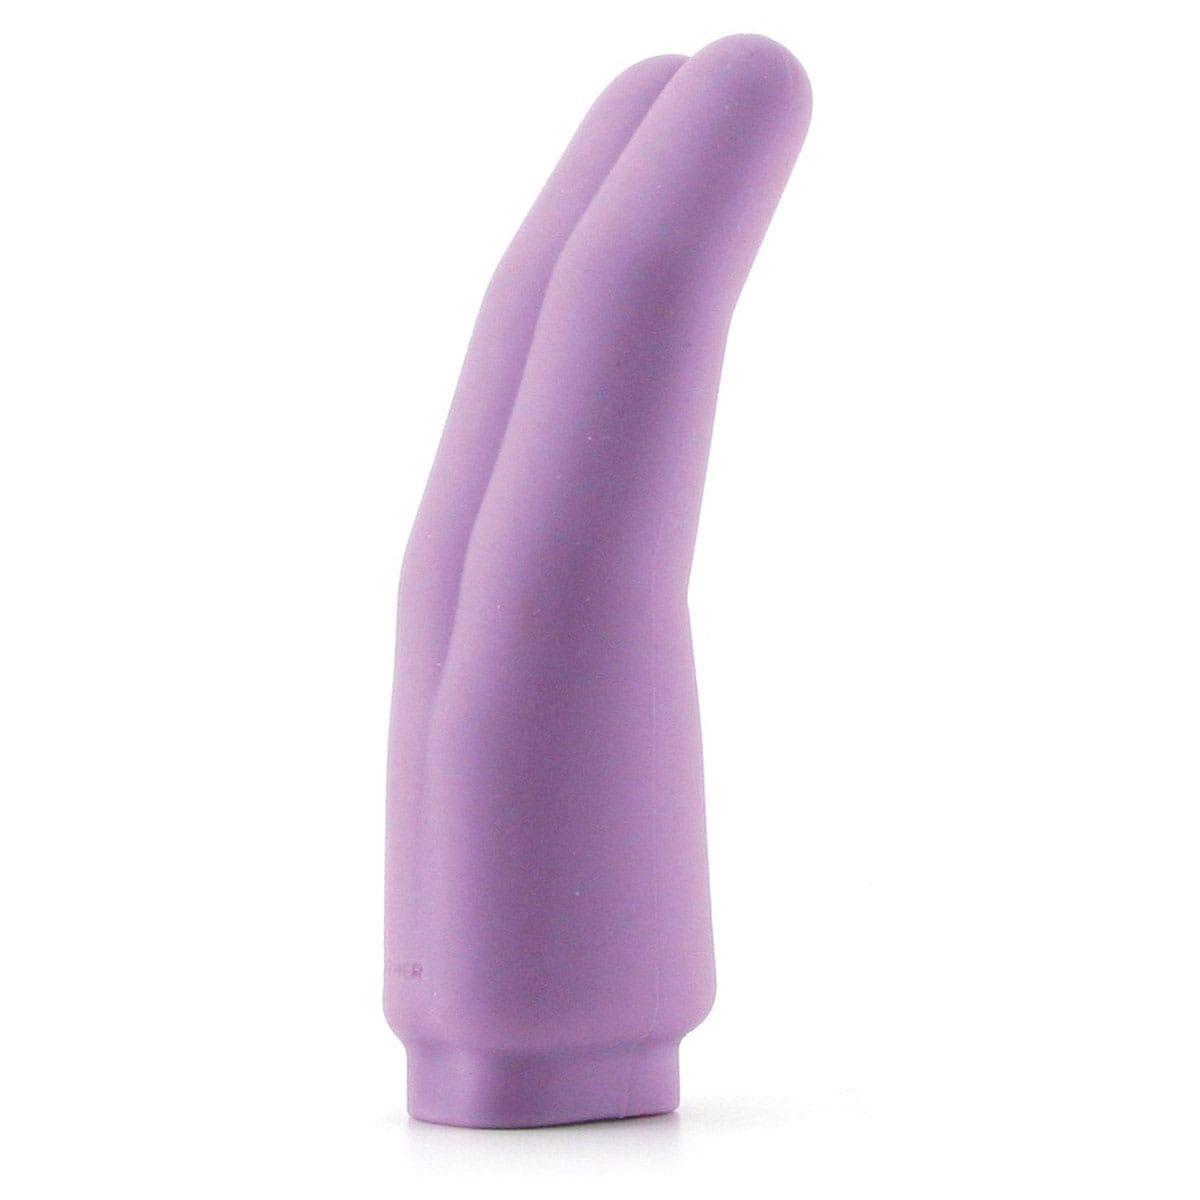 Buy Wet for Her Two   Violet 5.5 long and 1 thick dildo made by Wet For Her.